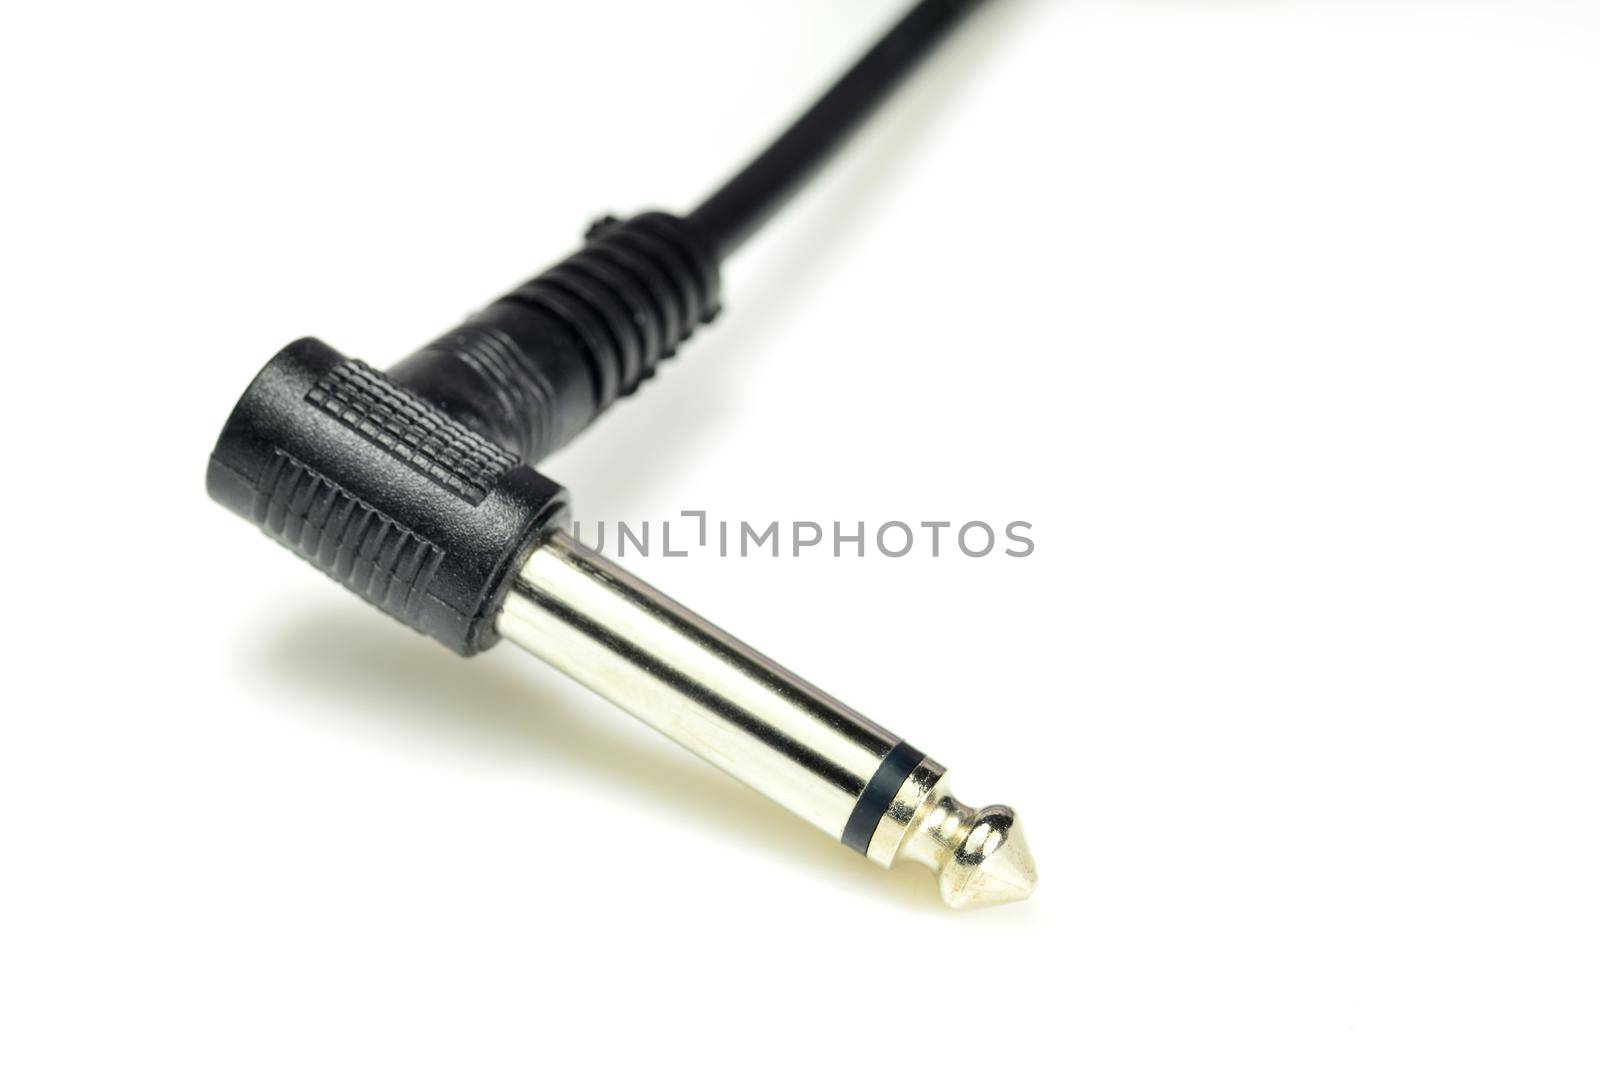 6.5mm phone connector in a closeup by Jochen